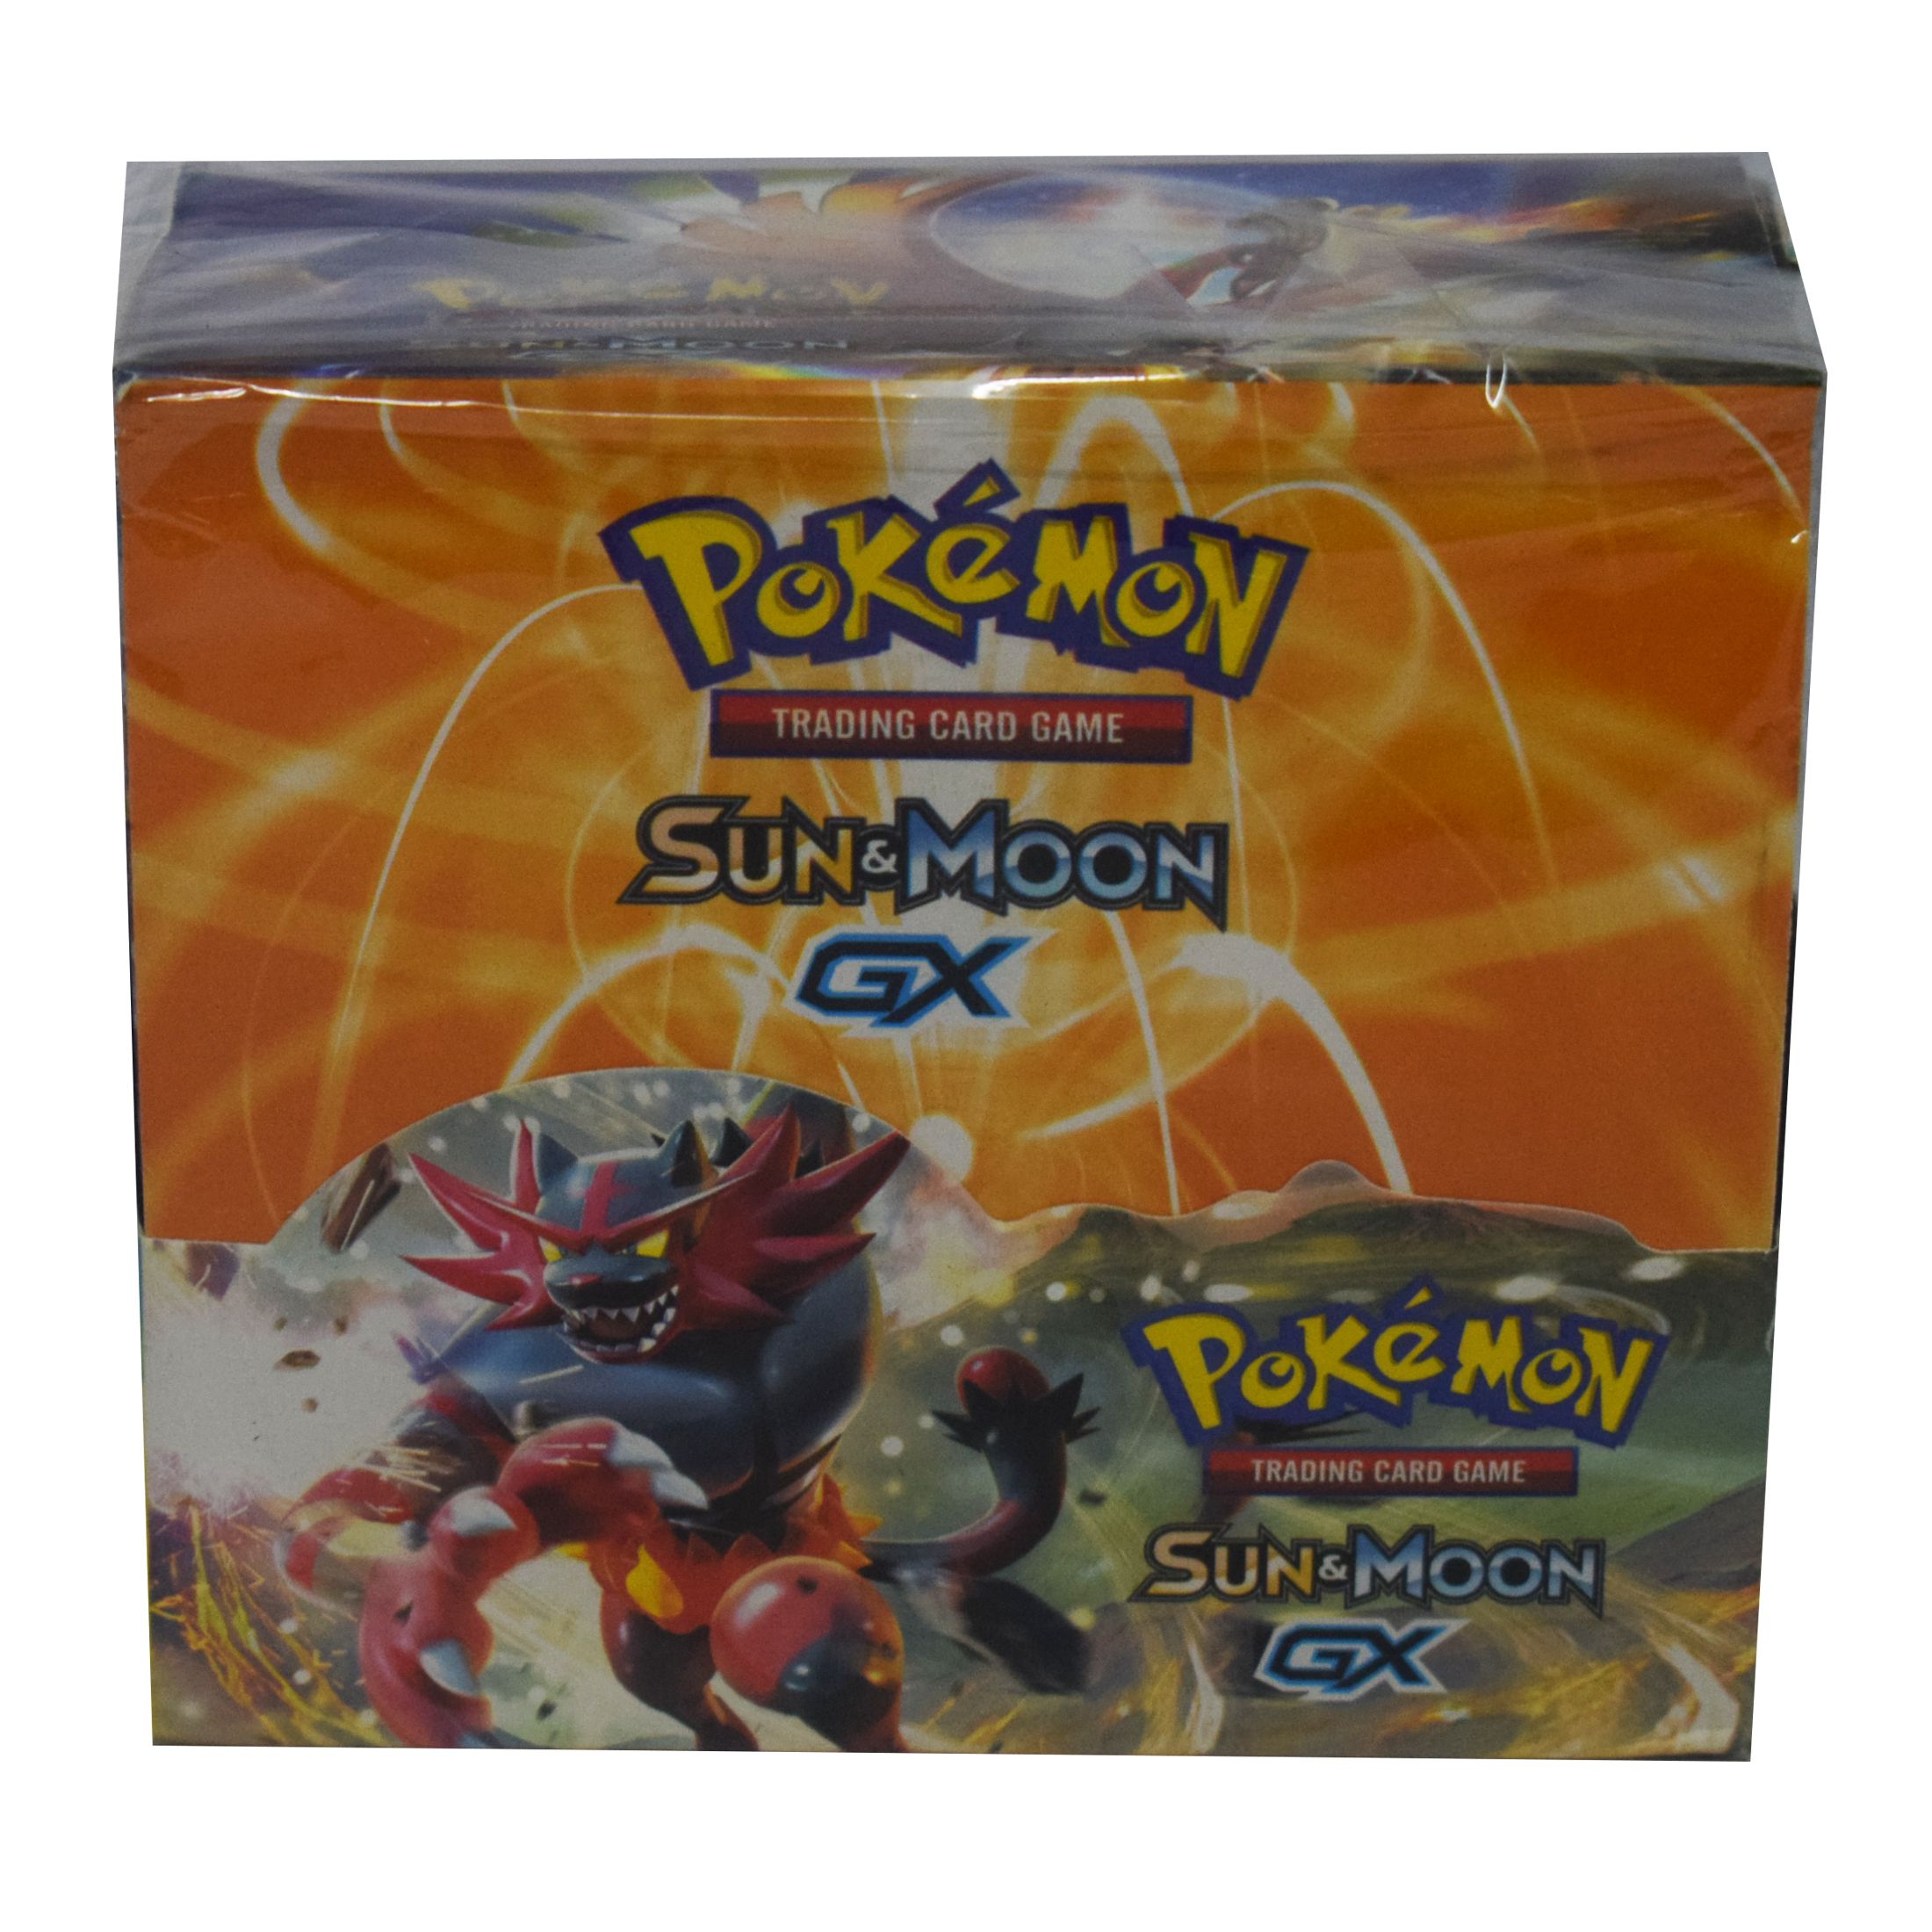 Pokemon Tcg Sun Moon Gx Booster Box Pack Of 36 Buy Pokemon Tcg Sun Moon Gx Booster Box Pack Of 36 Online At Low Price Snapdeal